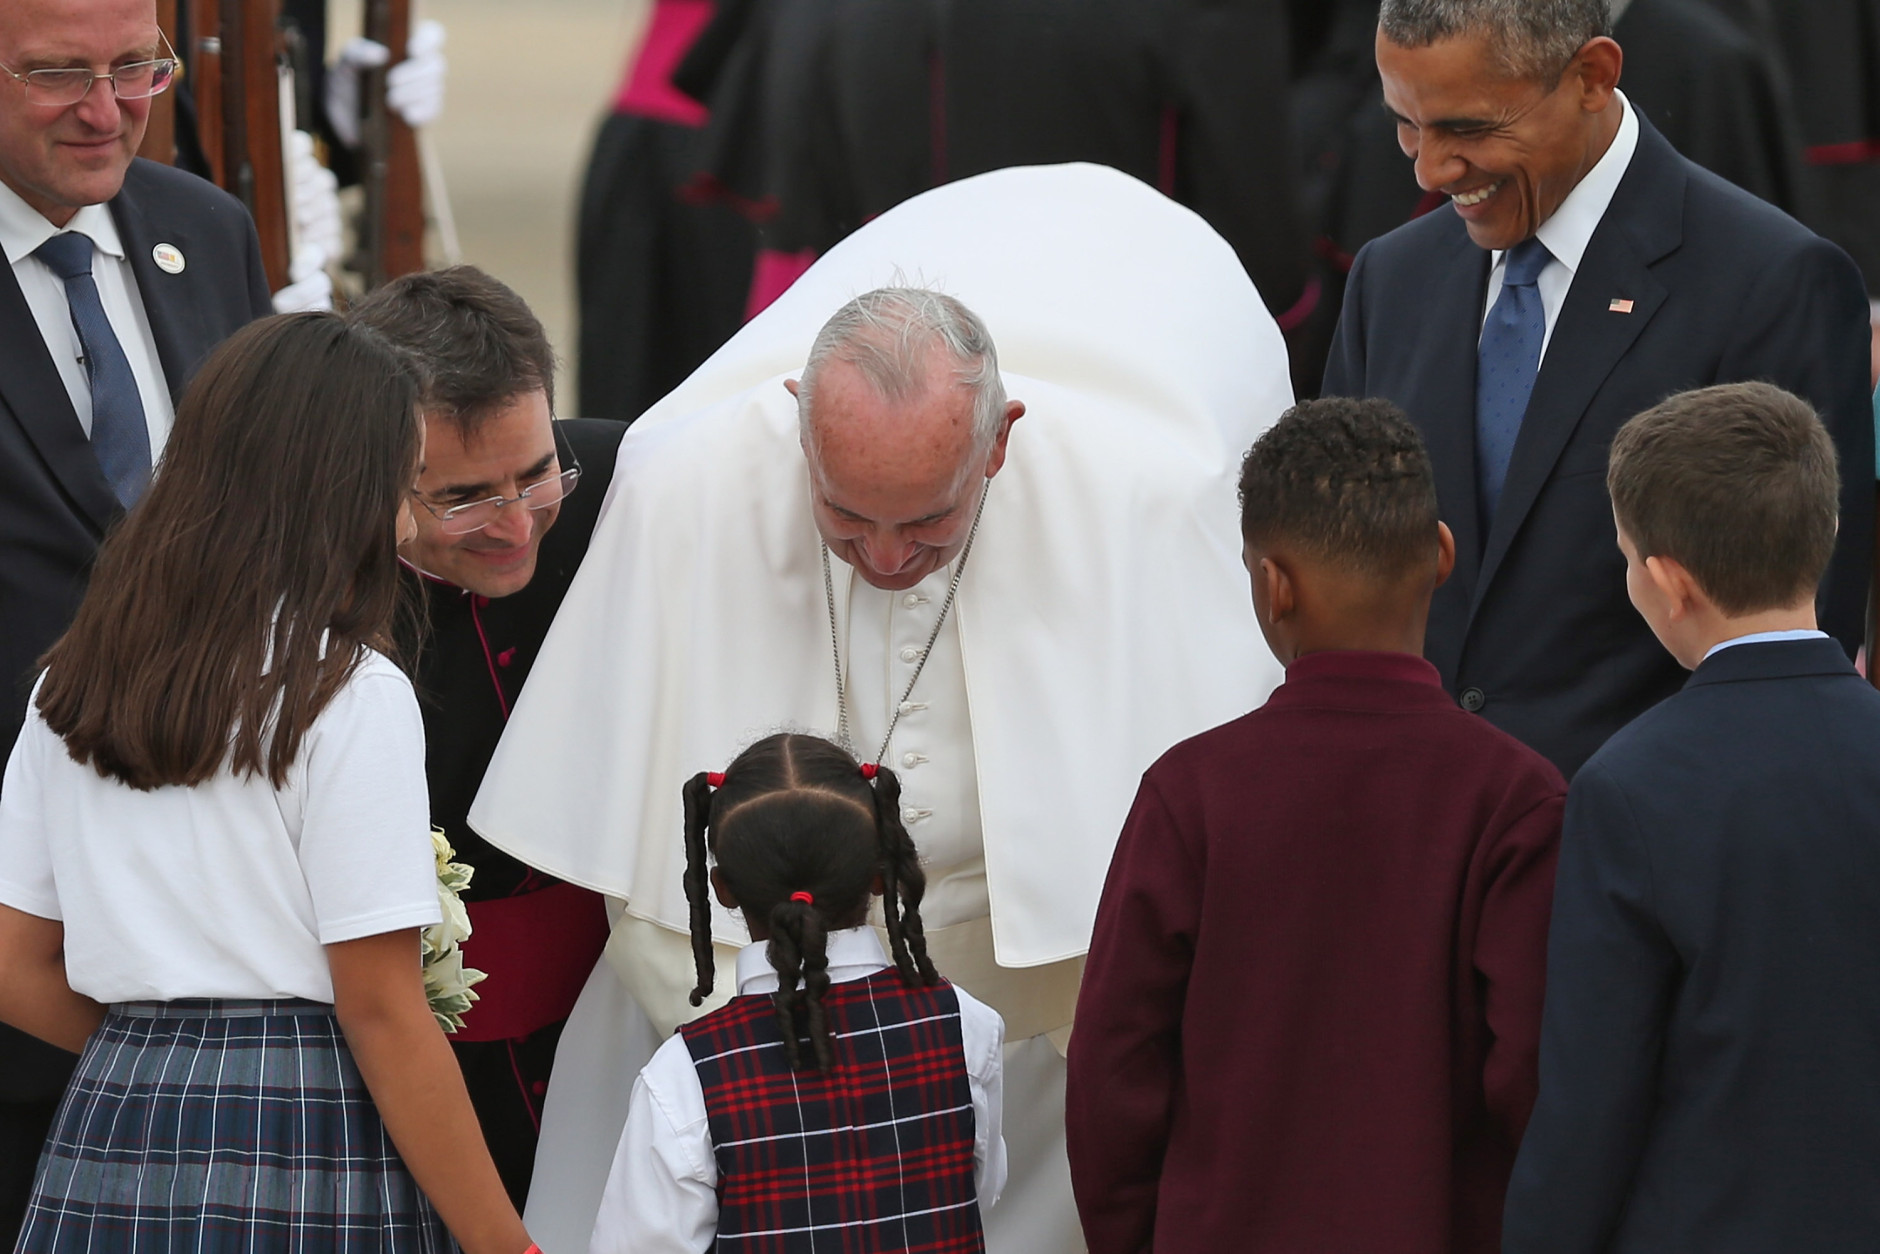 JOINT BASE ANDREWS, MD - SEPTEMBER 22:  Pope Francis is greeted by a group of Catholic school children after being welcomed by U.S. President Barack Obama (R) and other political and Catholic church leaders after arriving from Cuba September 22, 2015 at Joint Base Andrews, Maryland. Francis will be visiting Washington, New York City and Philadelphia during his first trip to the United States as Pope.  (Photo by Chip Somodevilla/Getty Images)